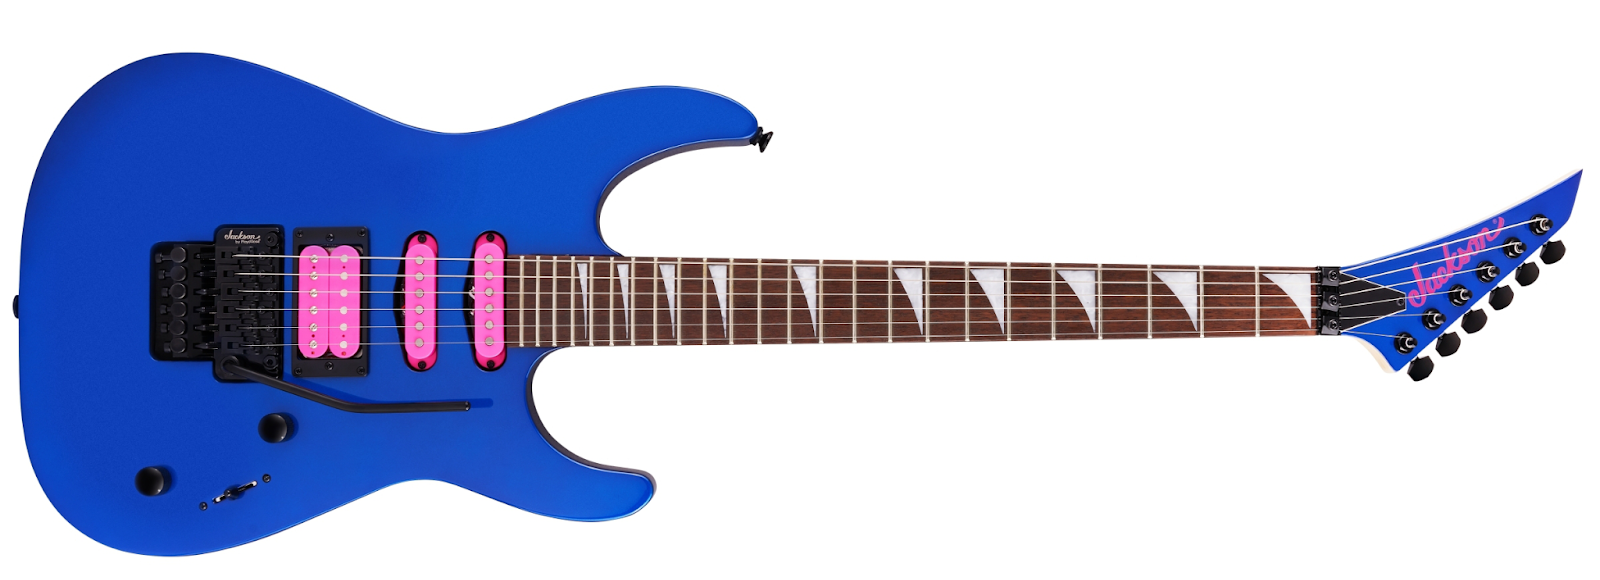 Jackson X Series Dinky DK3XR Electric Guitar for small hands.